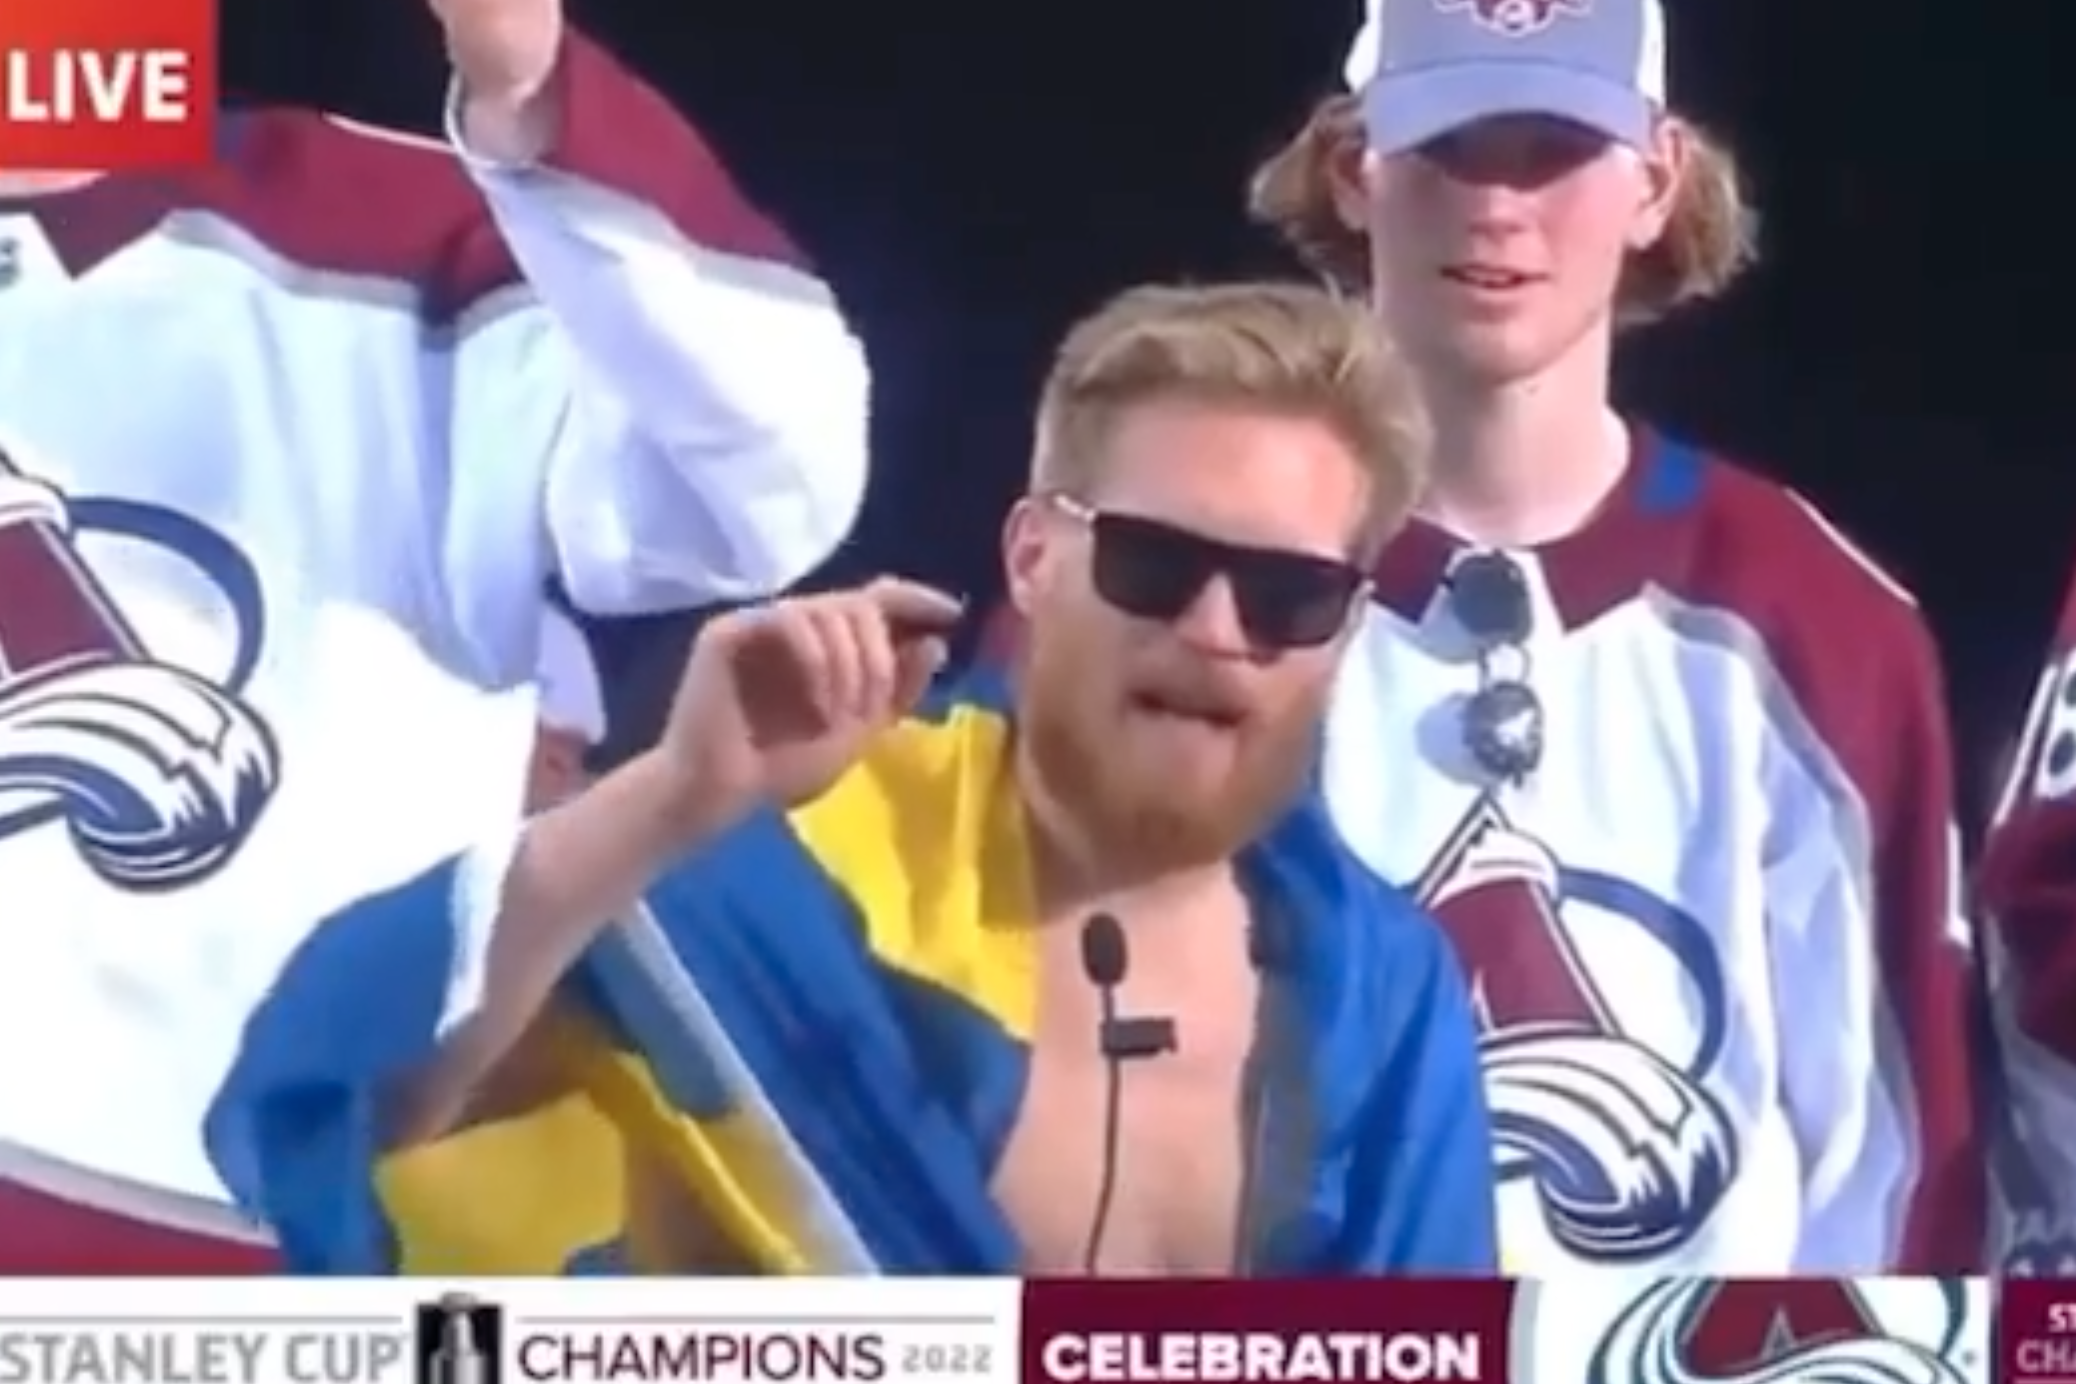 Celebrate the Avs' Stanley Cup win at these Denver victory parade parties